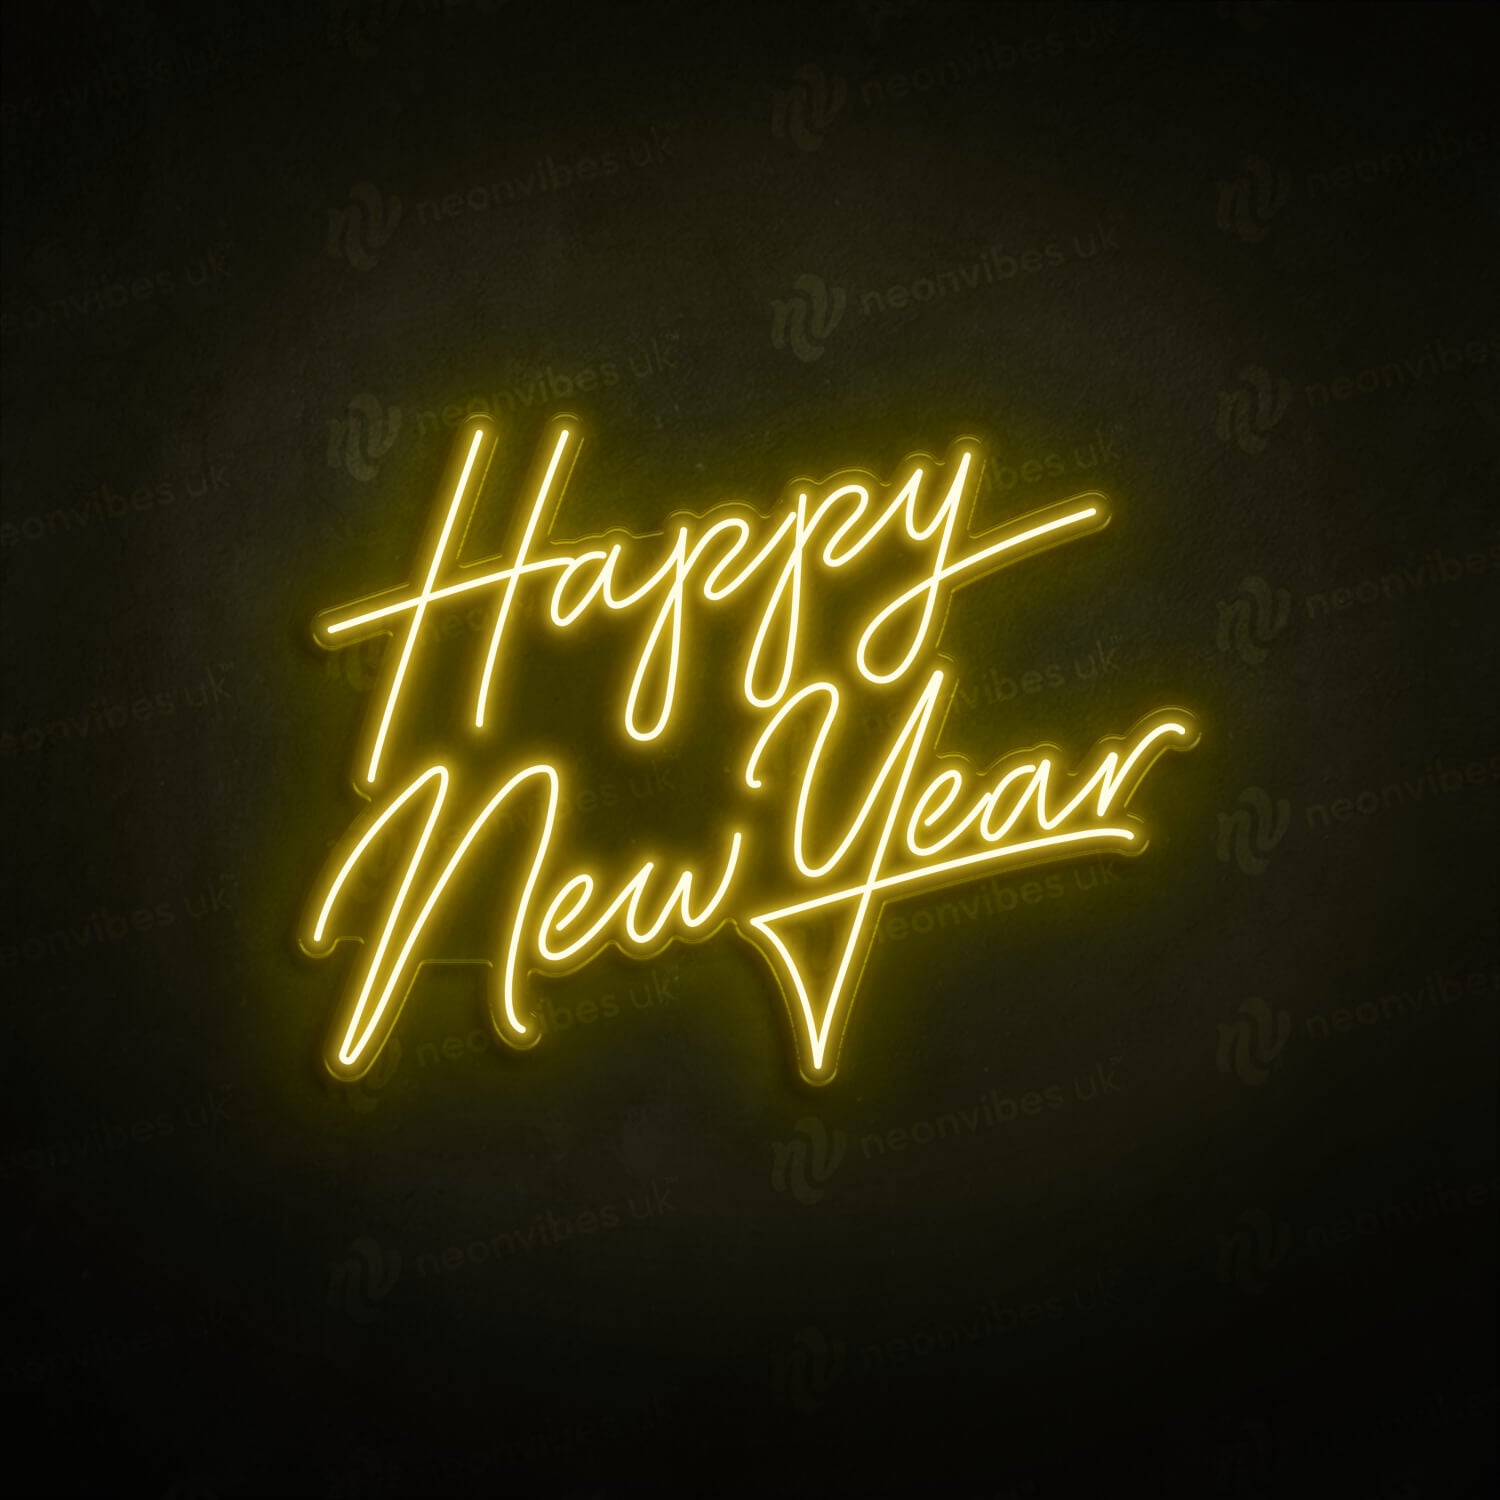 Happy New Year neon sign - V1 - Neon Vibes® neon signs